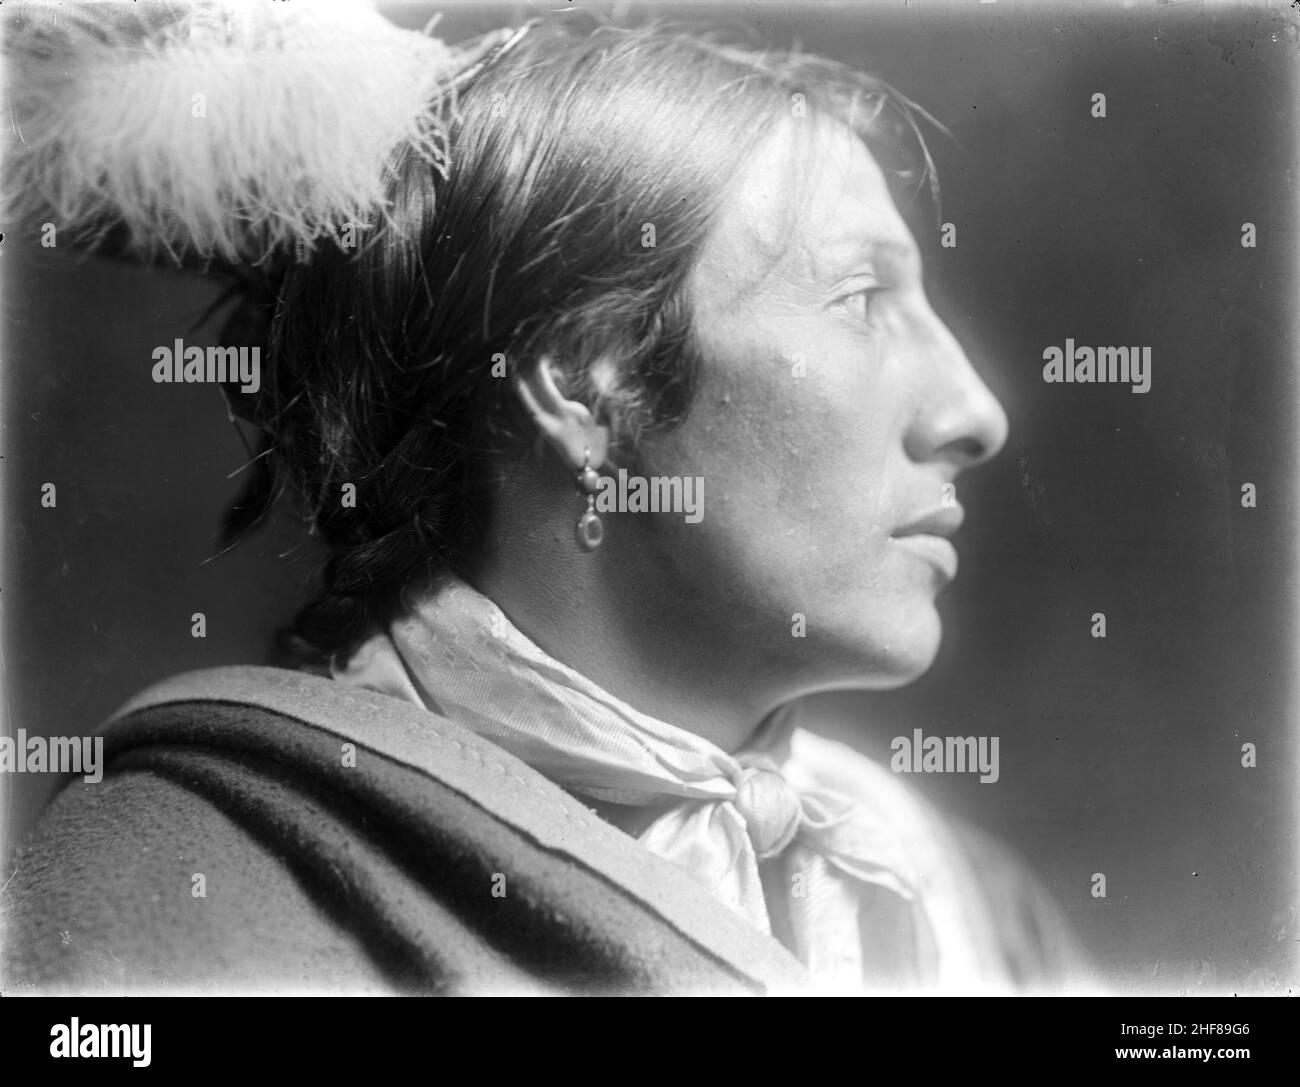 Amos Two Bulls — Profile is an Early Photography gelatin silver print photographic print created by Gertrude Käsebier in 1900. Stock Photo